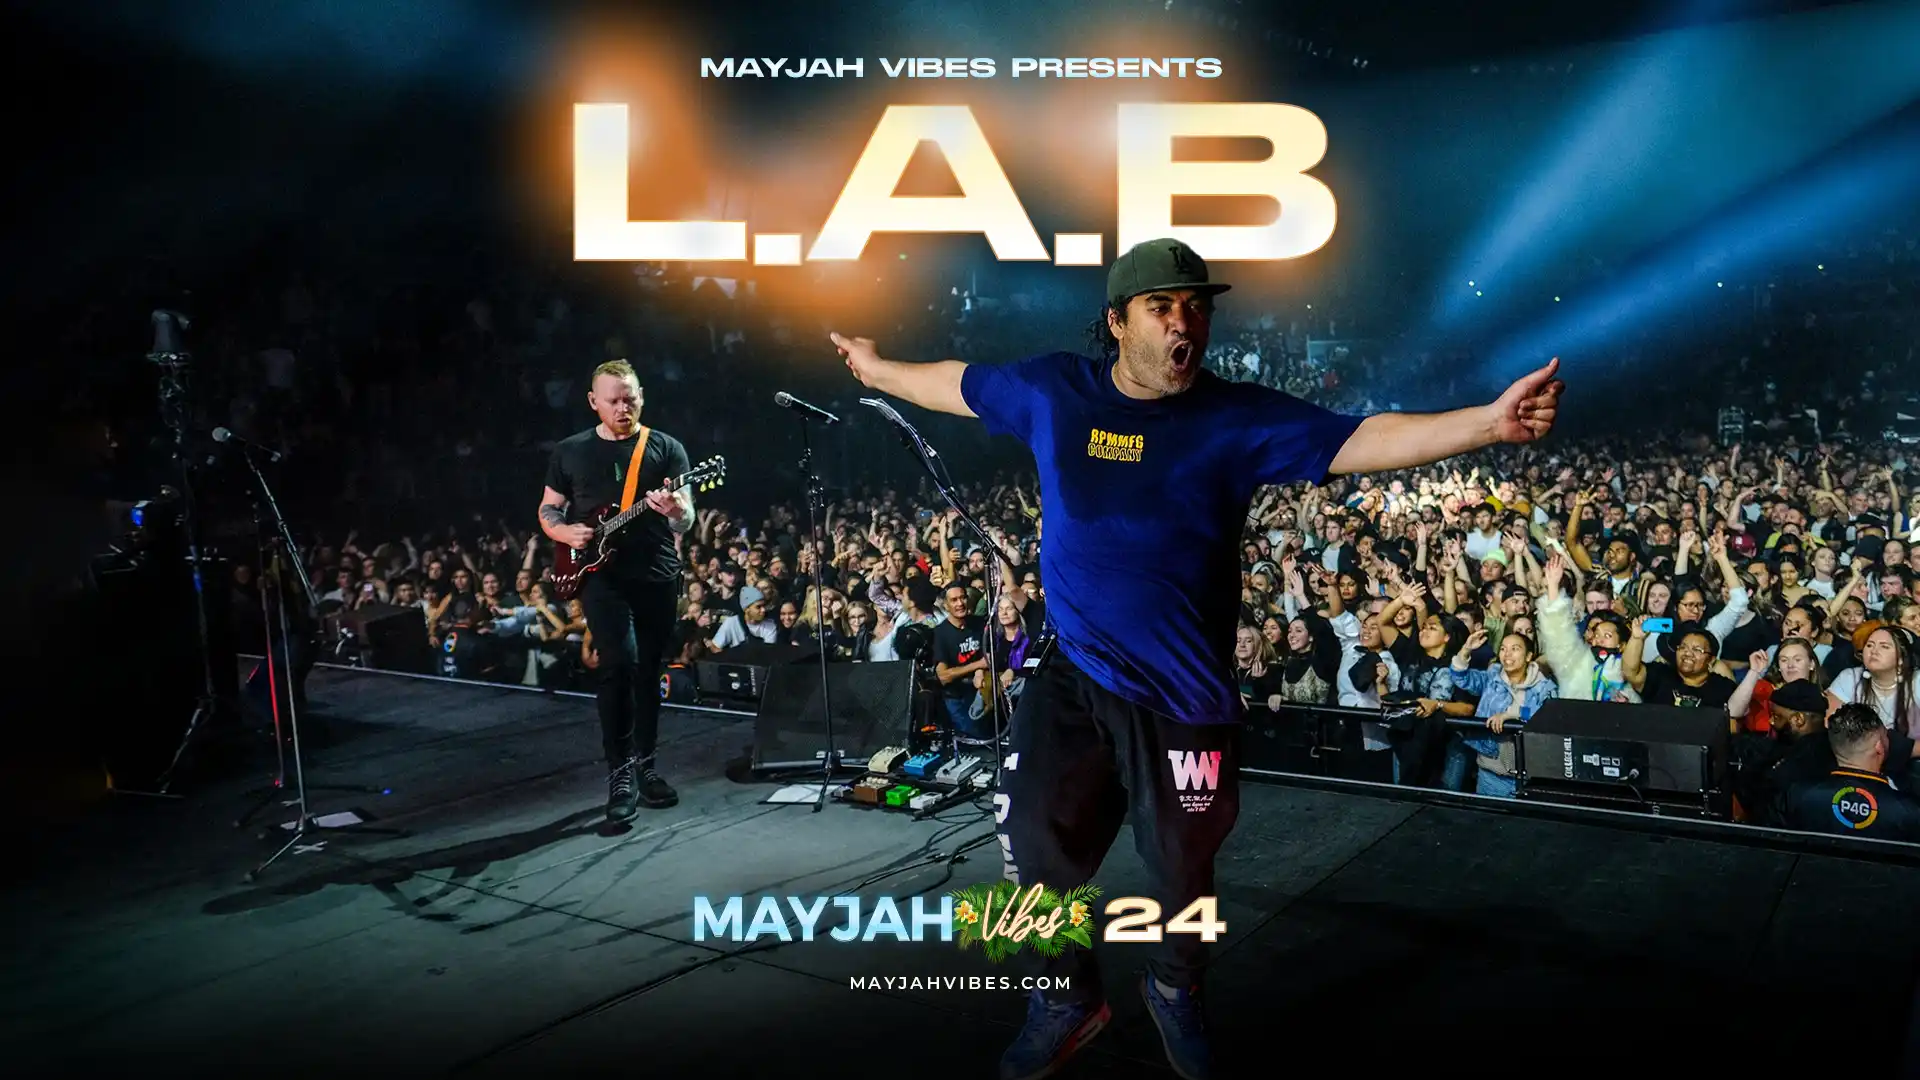 Experience L.A.B's electrifying performance at Mayjah Vibes 2024! Groove to their eclectic blend of reggae, funk, and rock.